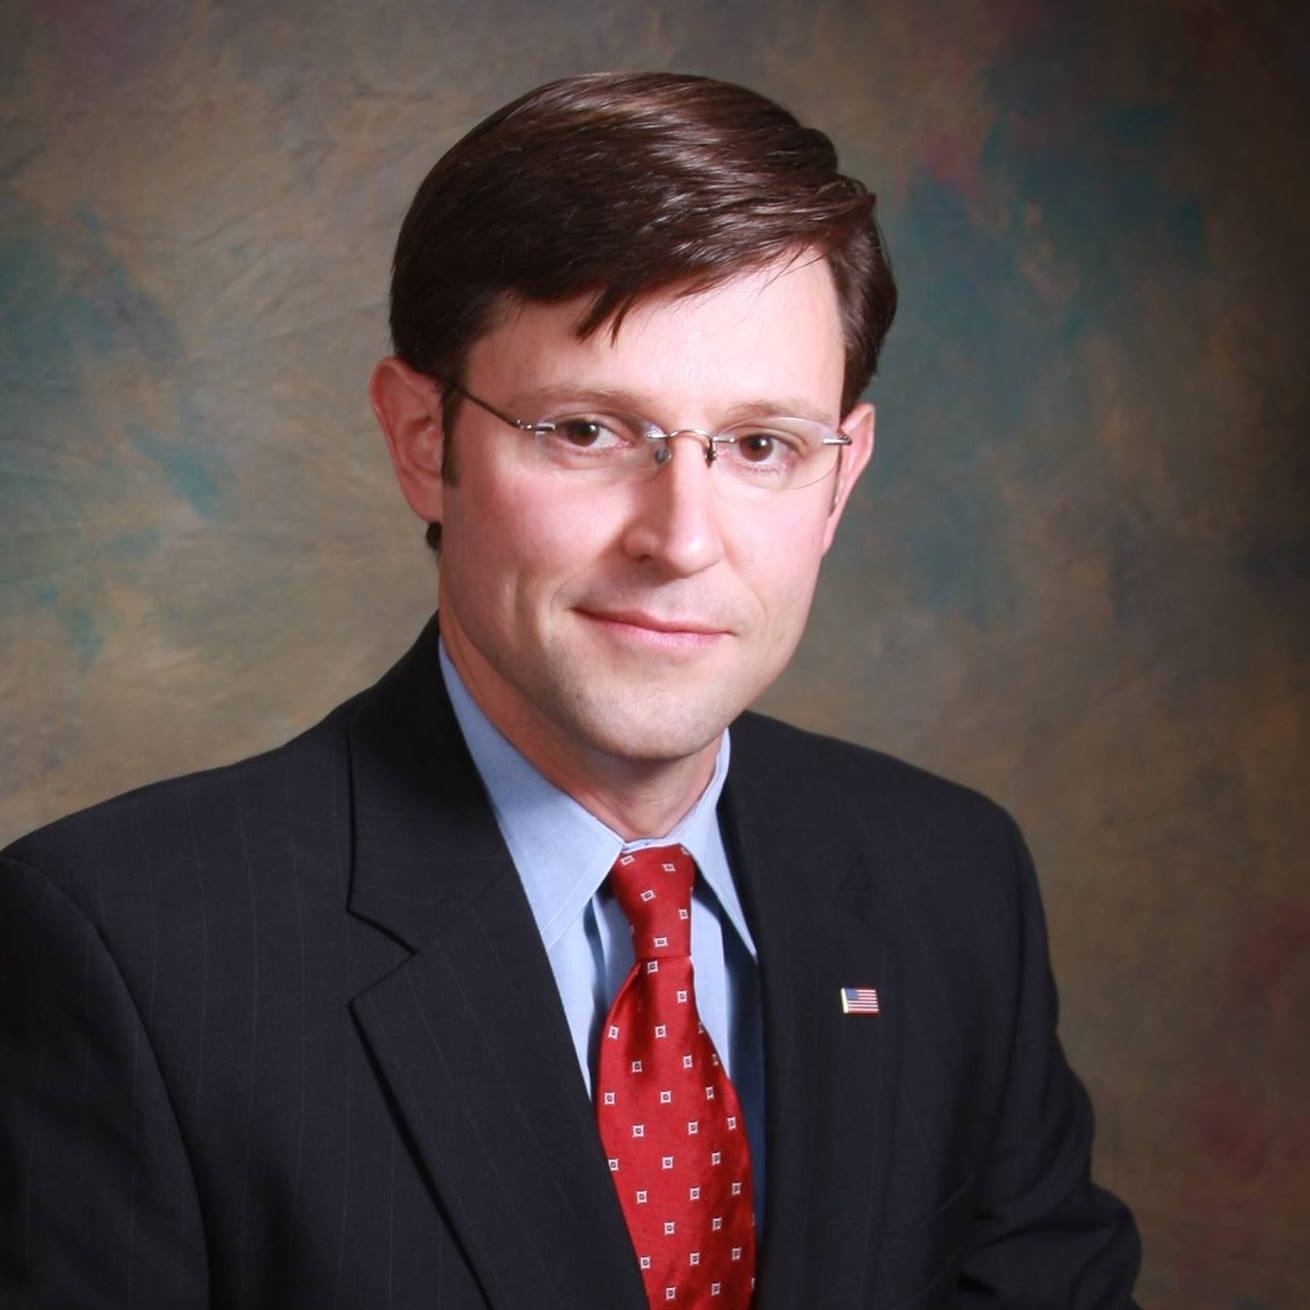 Q&A with Republican Study Committee Chair, Rep. Mike Johnson